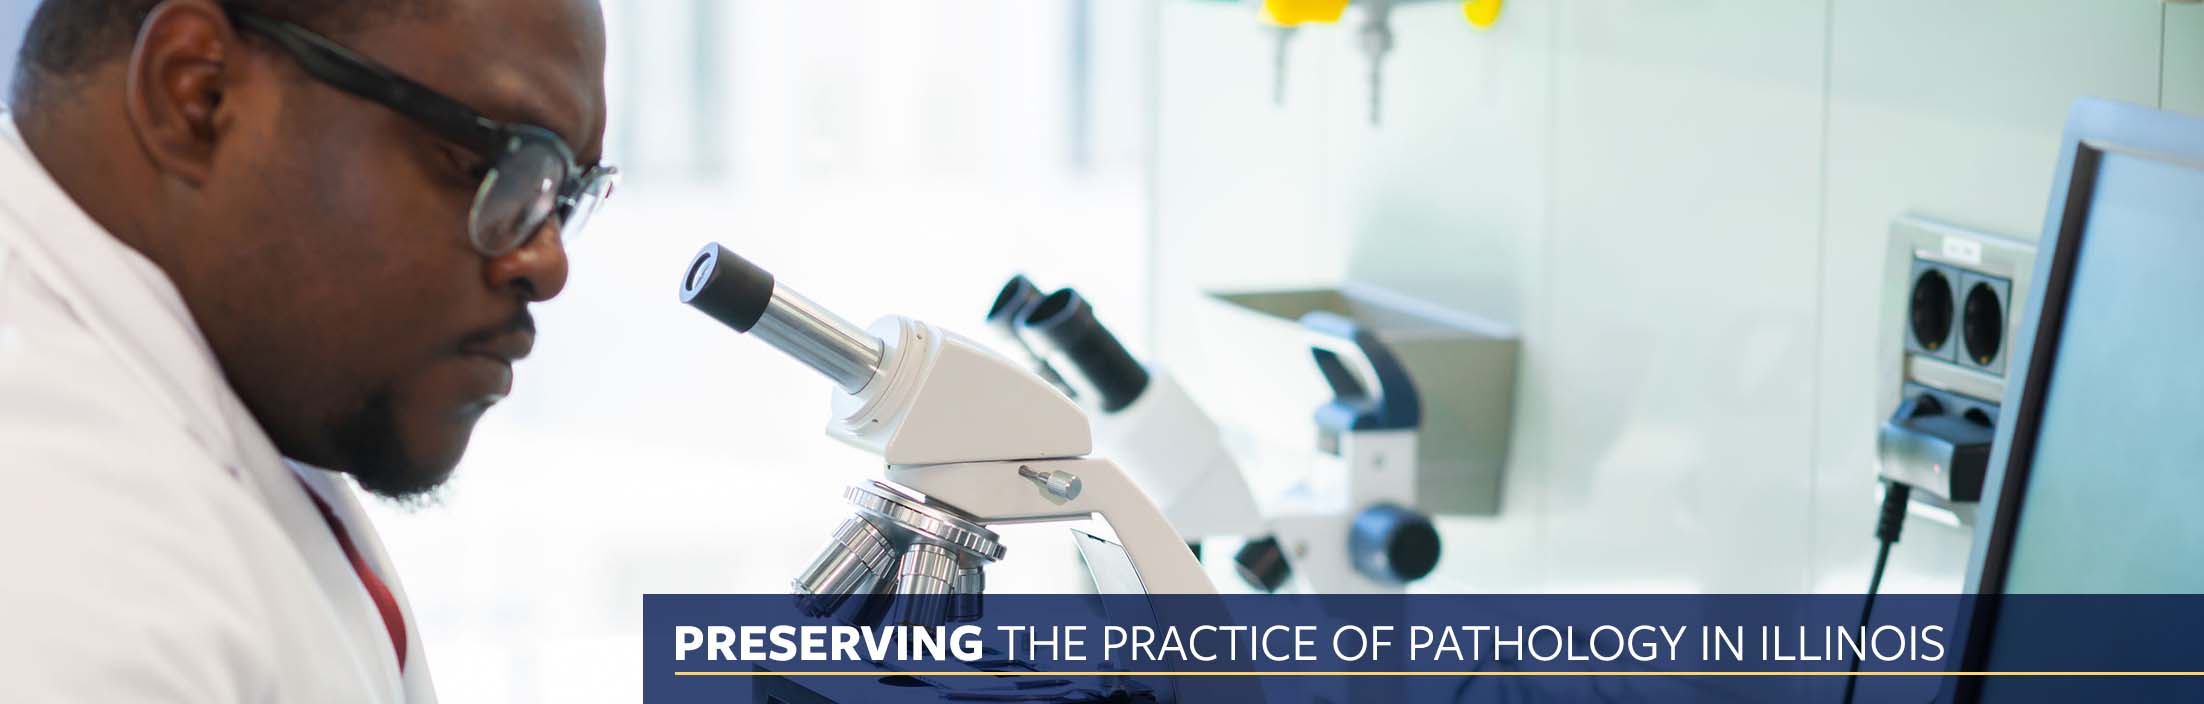 Preserving the practice of pathology in Illinois